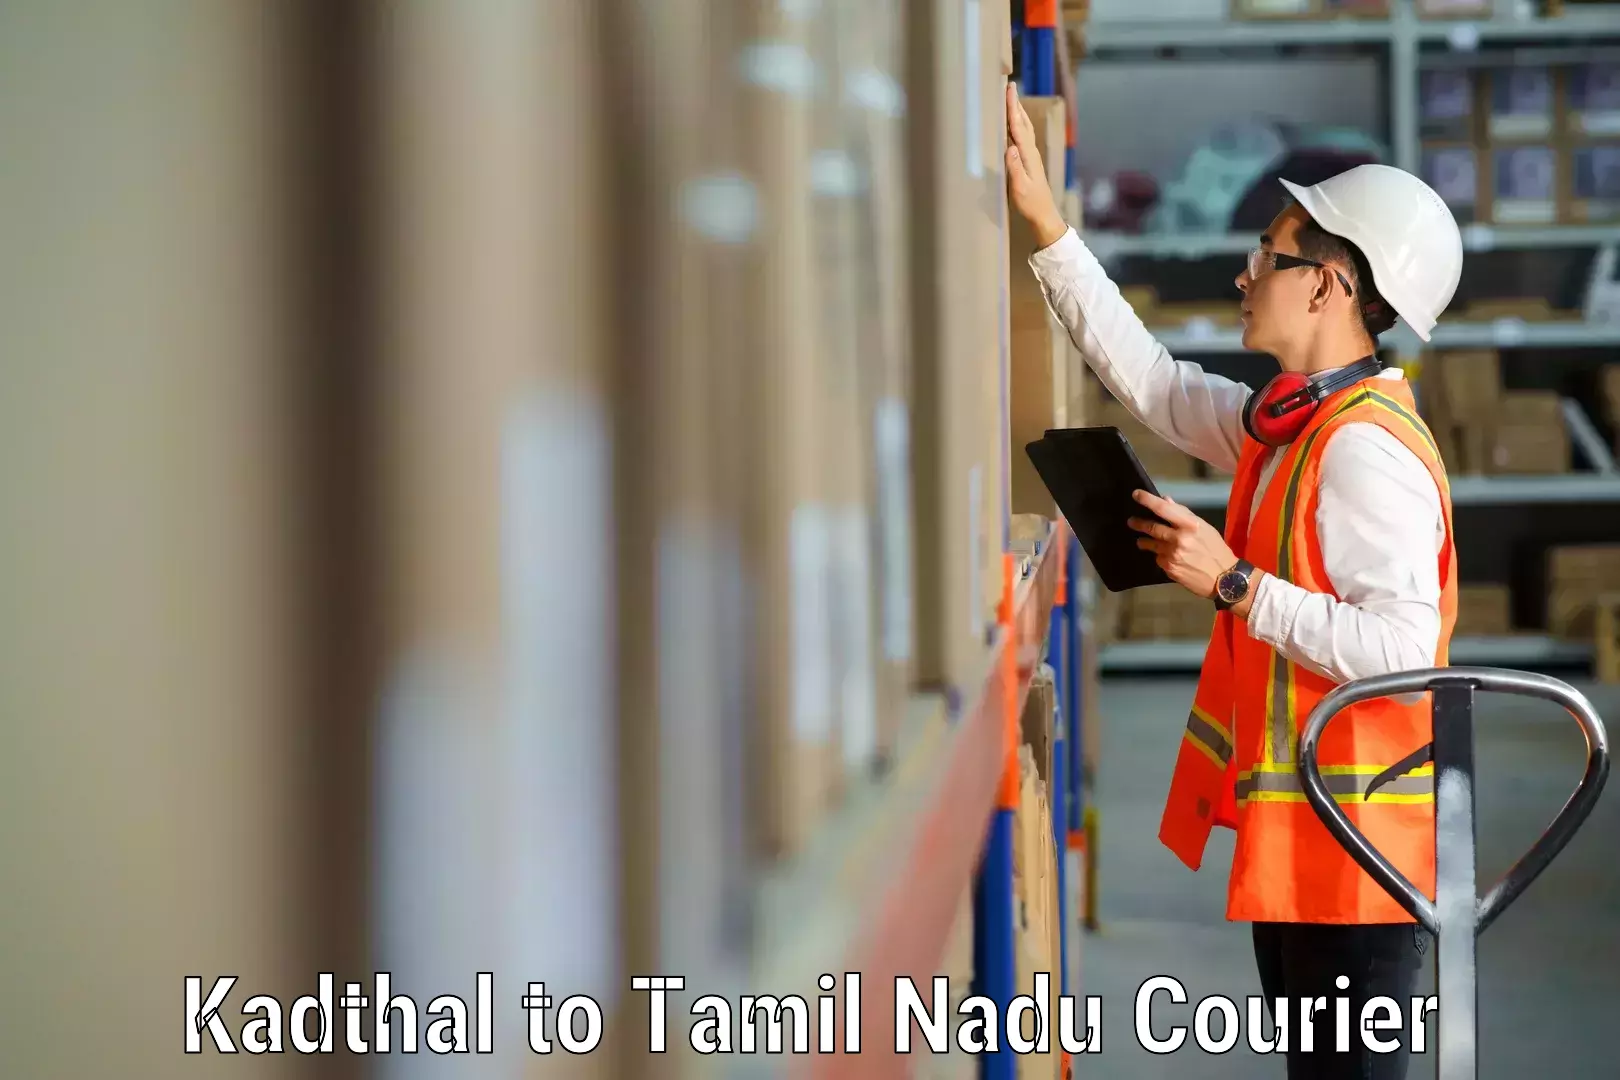 Trusted moving company Kadthal to Ambur